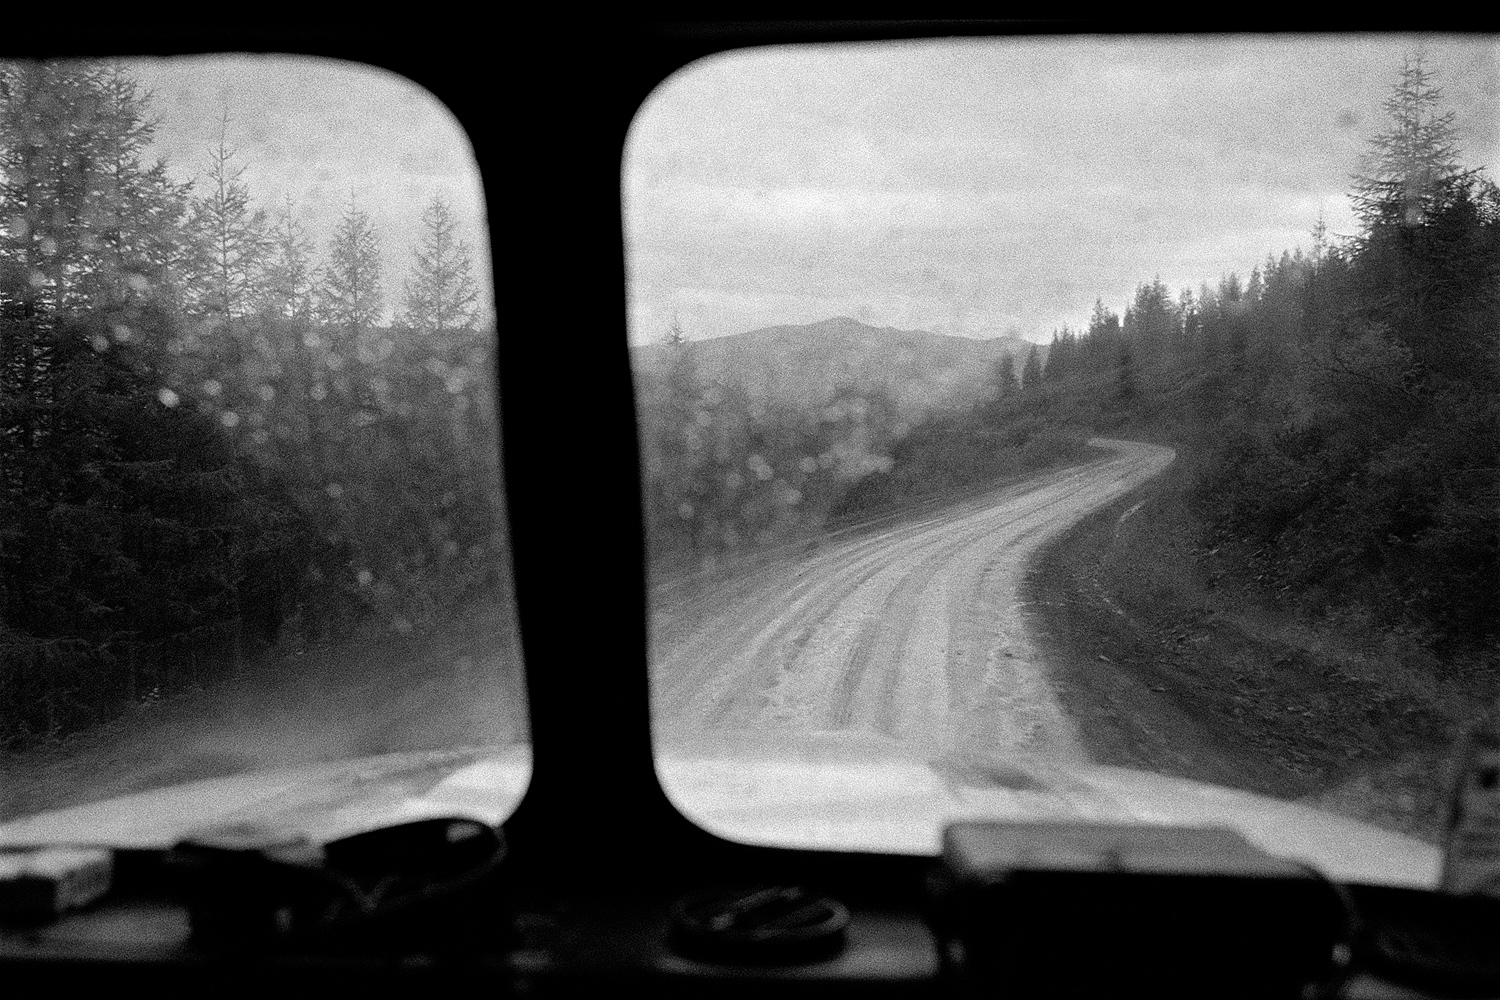 The Kolyma highway is the main road in the Magadan region. The track was built in the 1930-50s, mainly by labor camp prisoners.